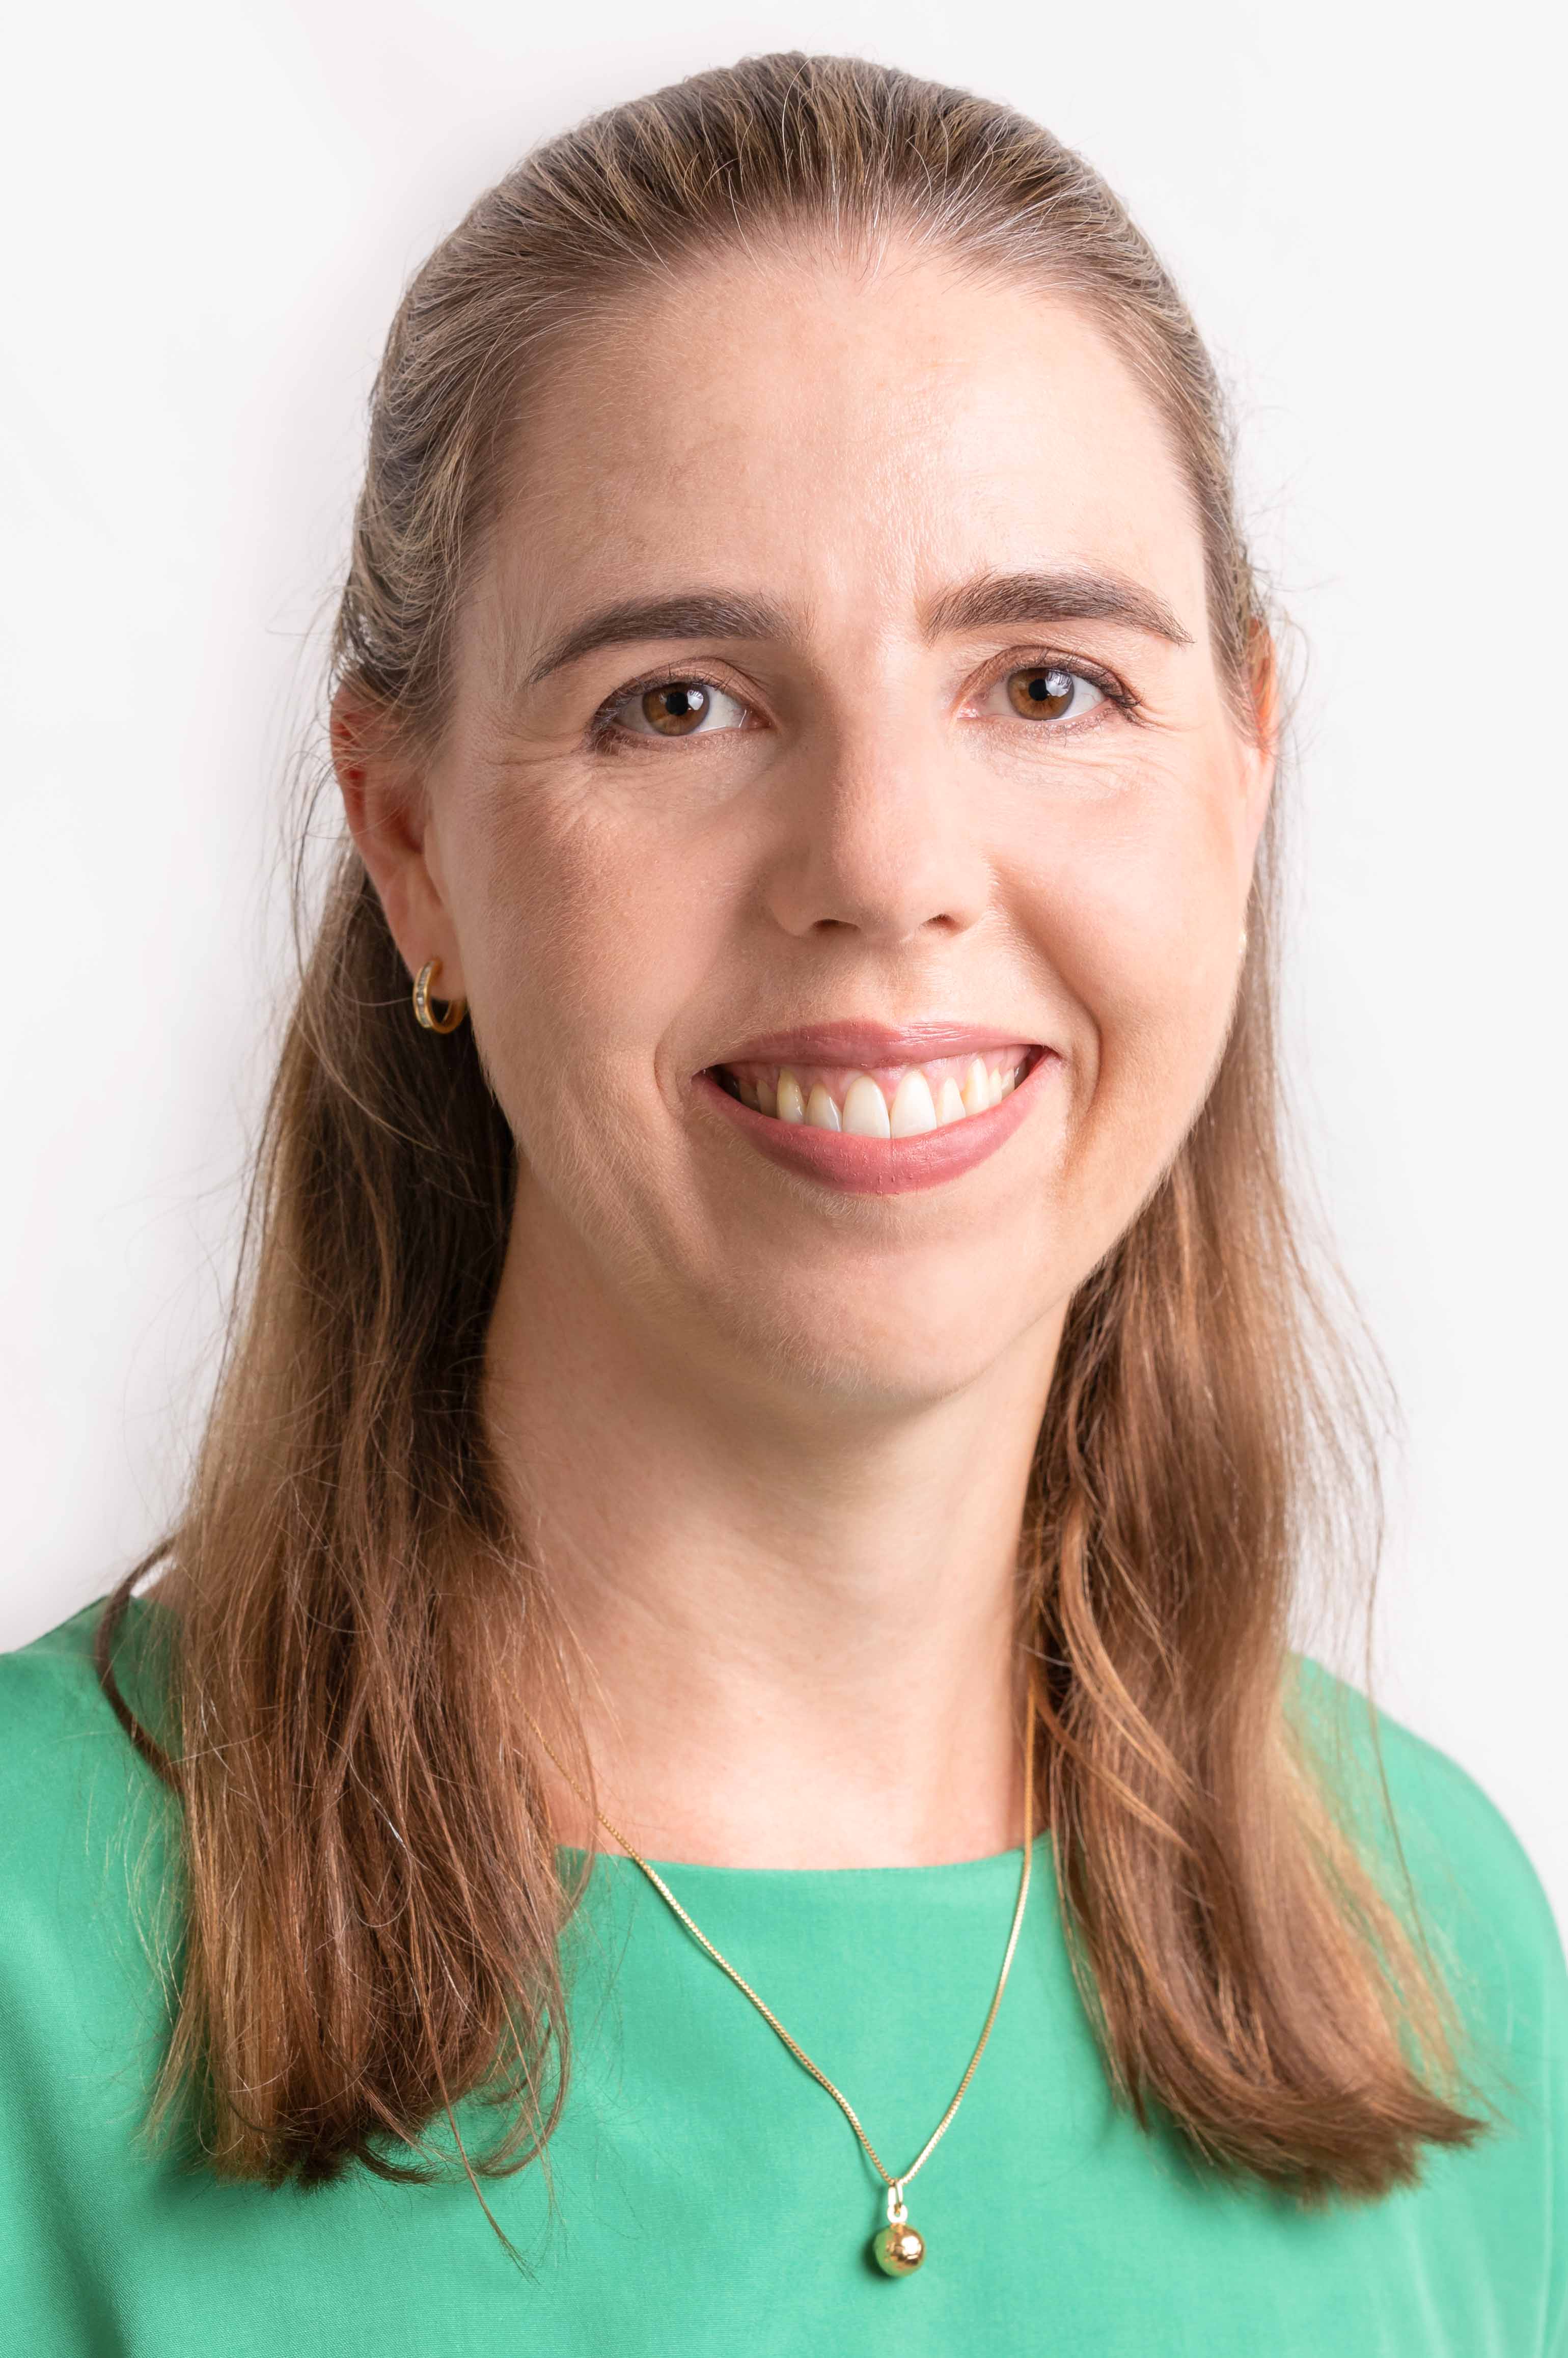 Dr Melinda Heywood - Female Obstetrician and Gynaecologist in Brisbane